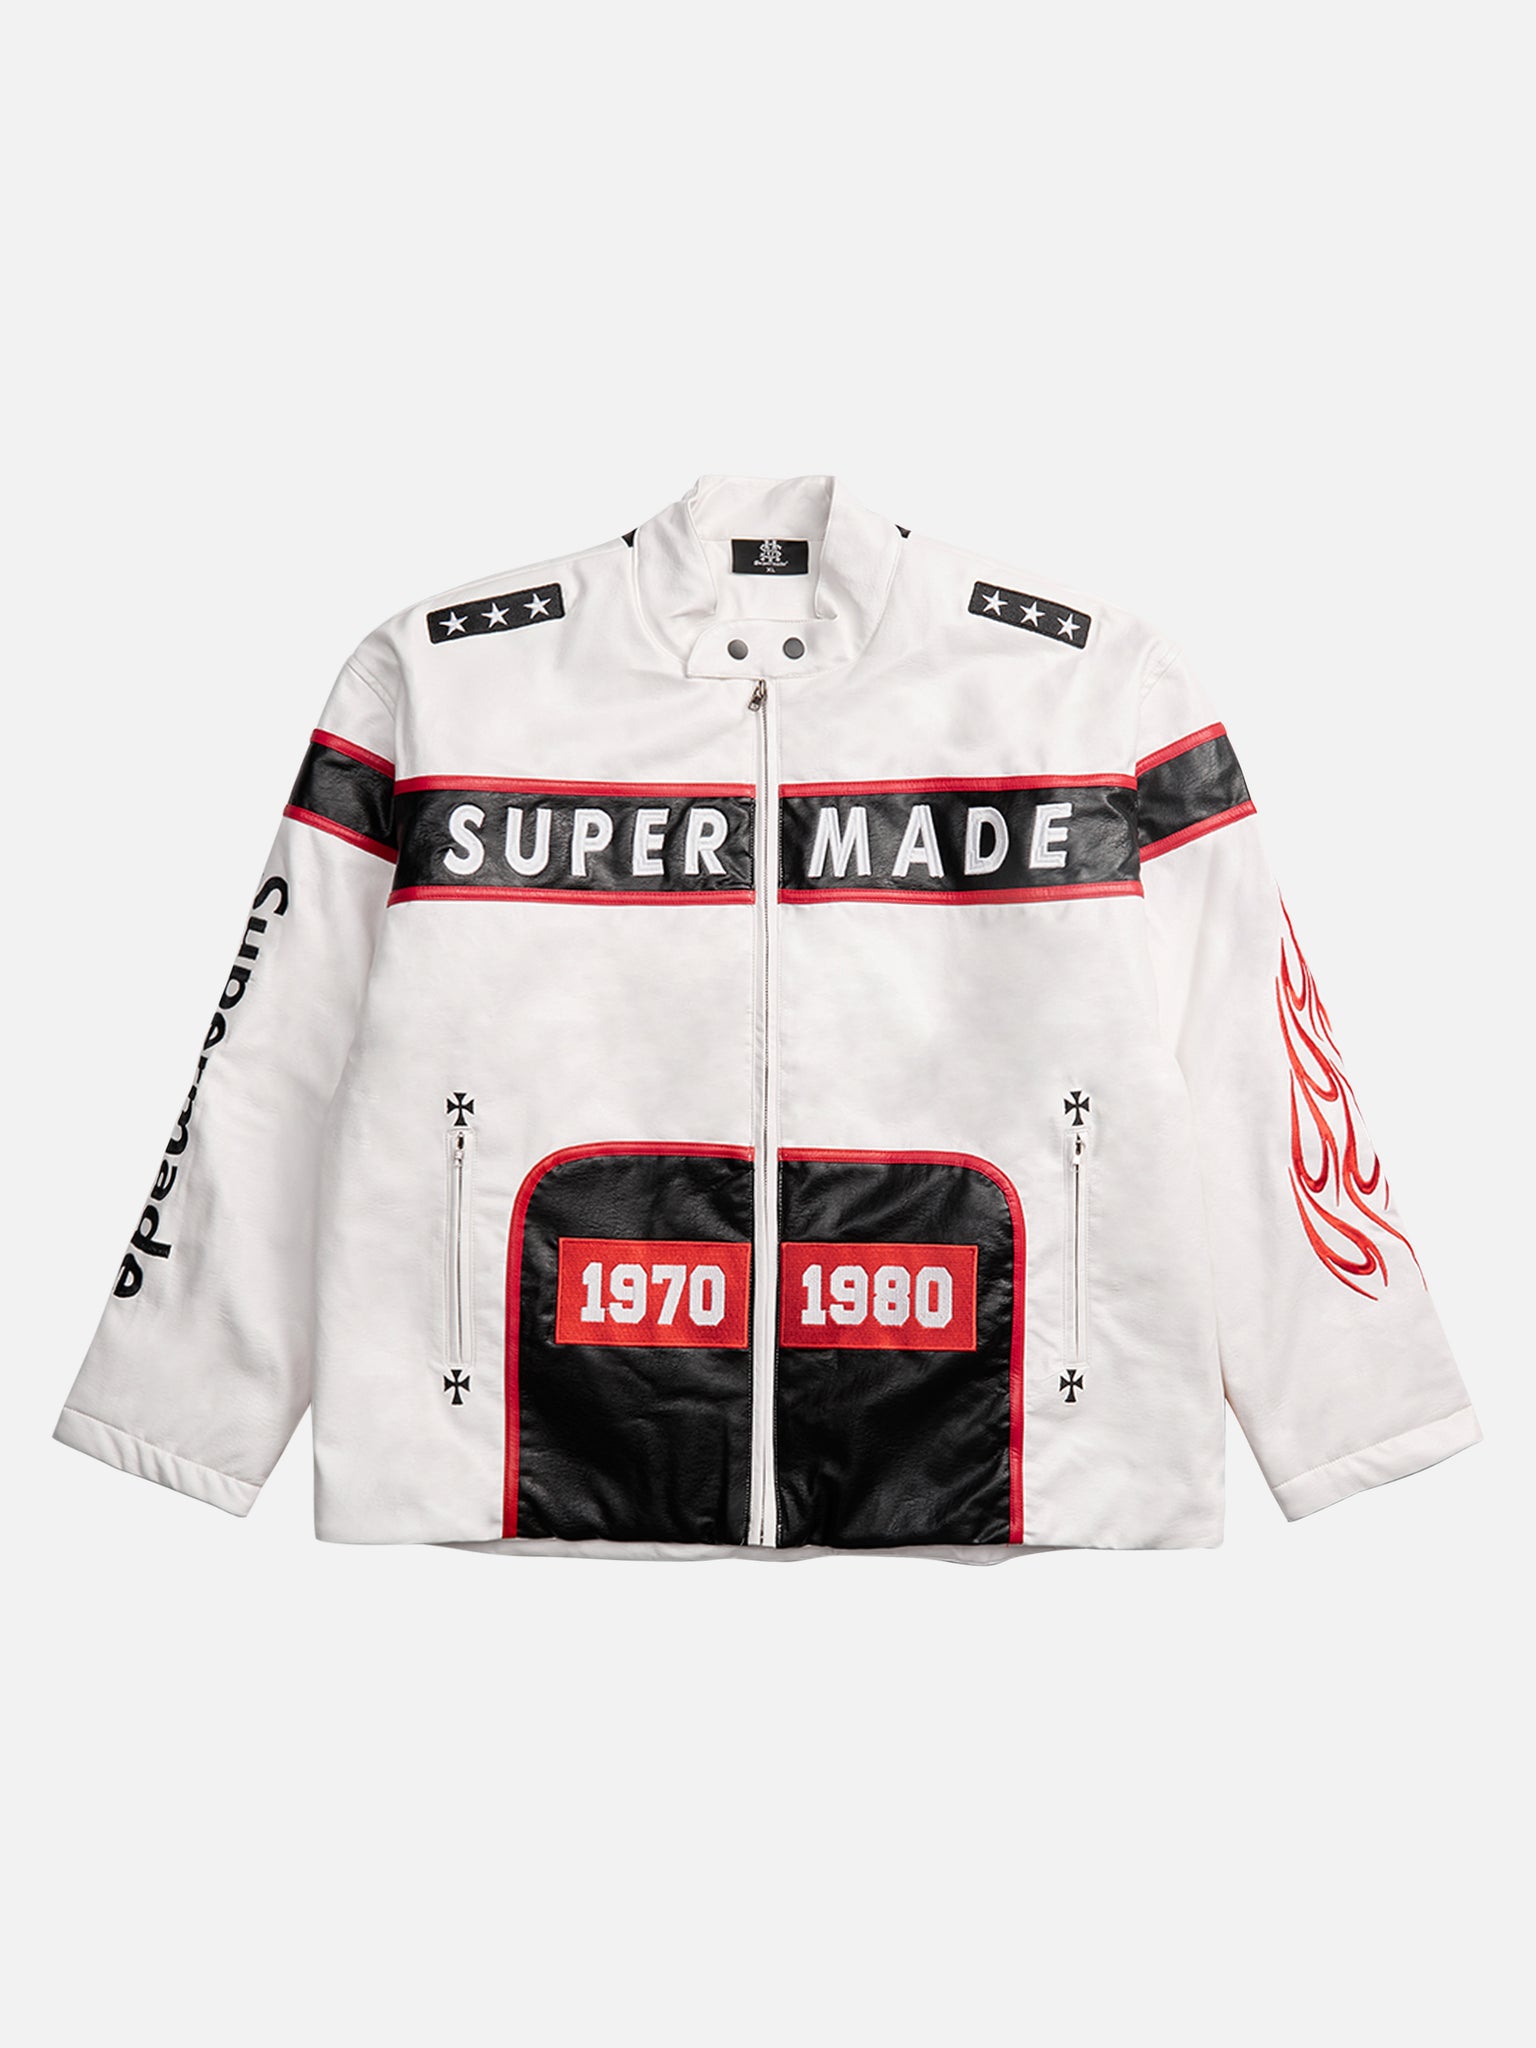 Thesupermade Vintage Biker Style Embroidered Leather Jacket - 1746